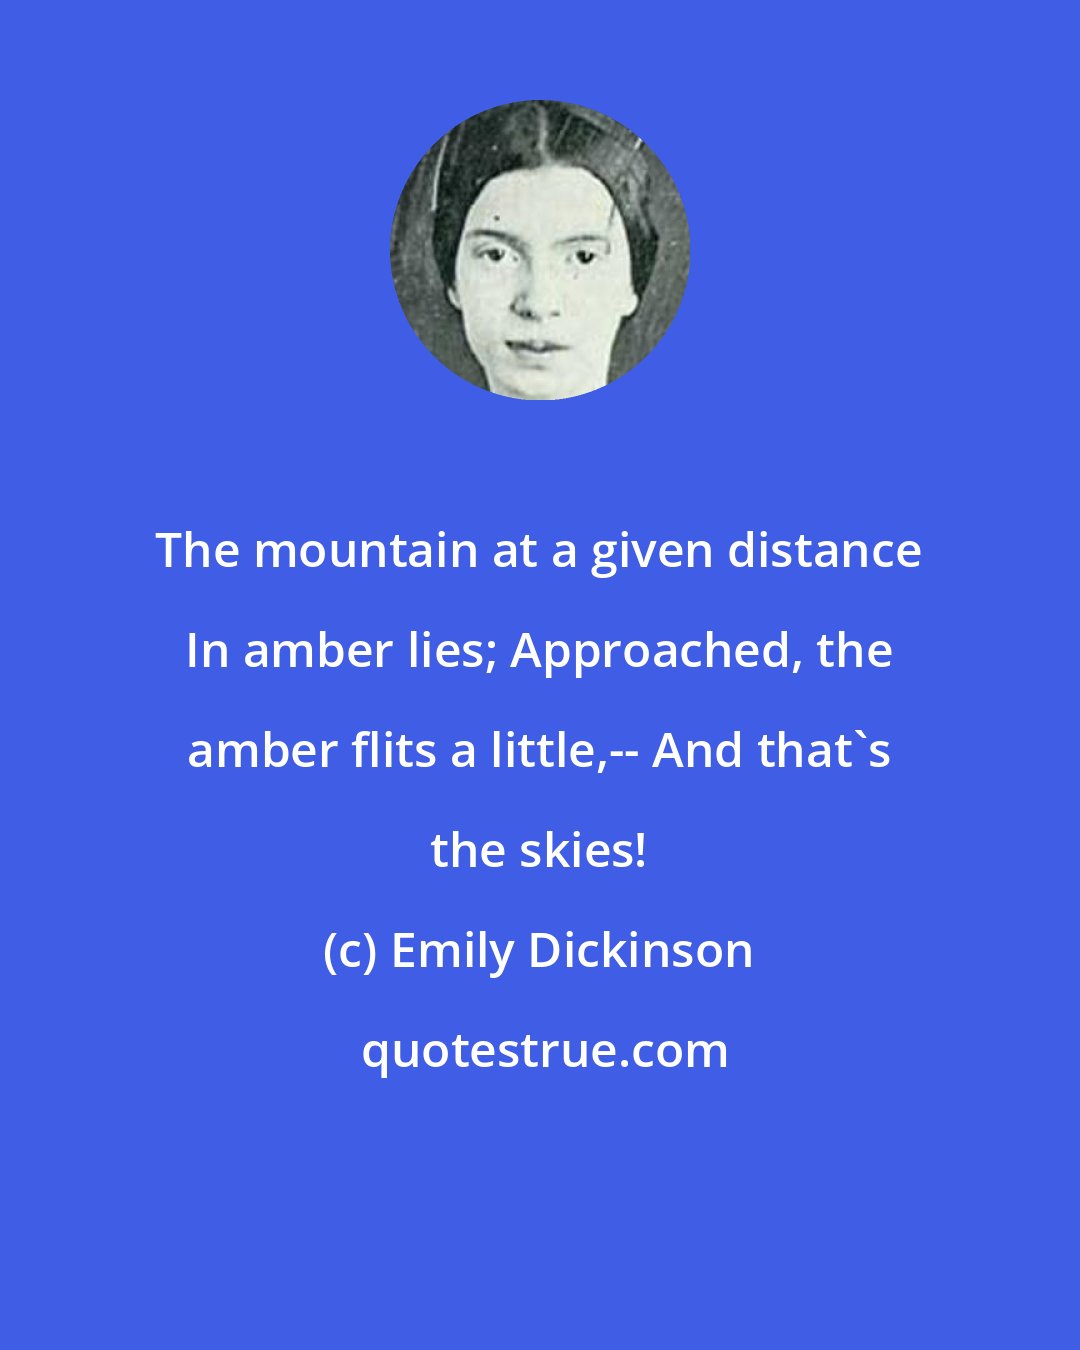 Emily Dickinson: The mountain at a given distance In amber lies; Approached, the amber flits a little,-- And that's the skies!